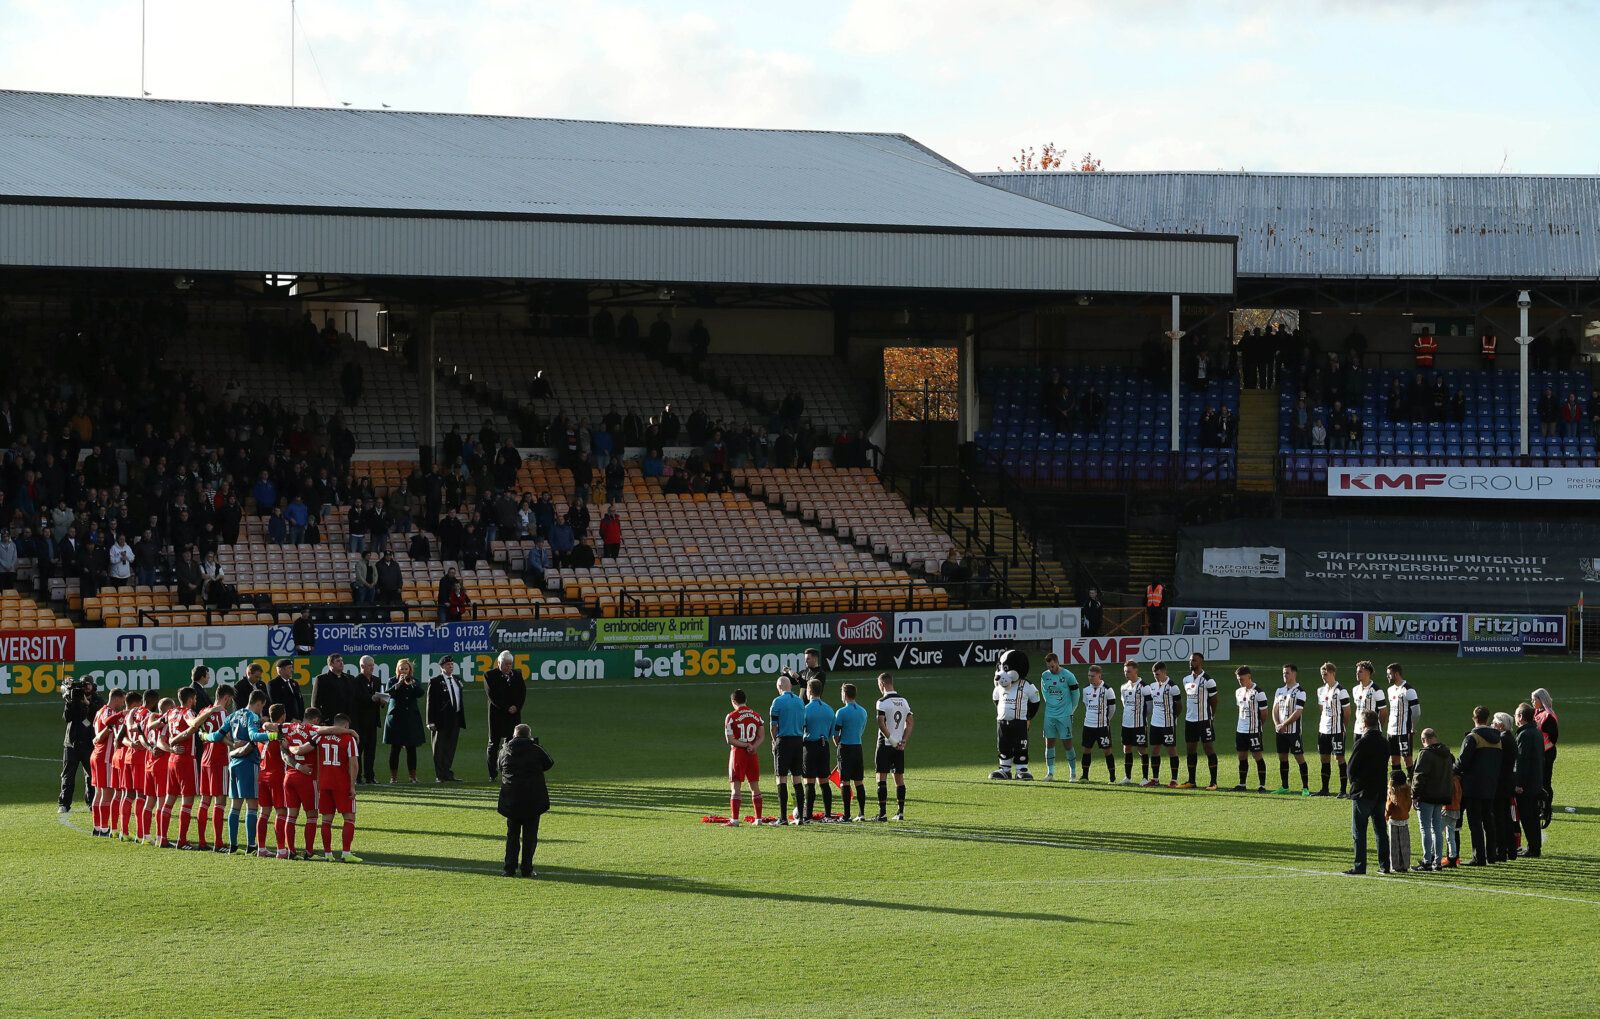 Soccer Football - FA Cup First Round - Port Vale v Sunderland, Vale Park, Stoke-on-Trent, Britain - November 11, 2018   General view during a minutes silence as part of remembrance commemorations before the match     Action Images/John Clifton